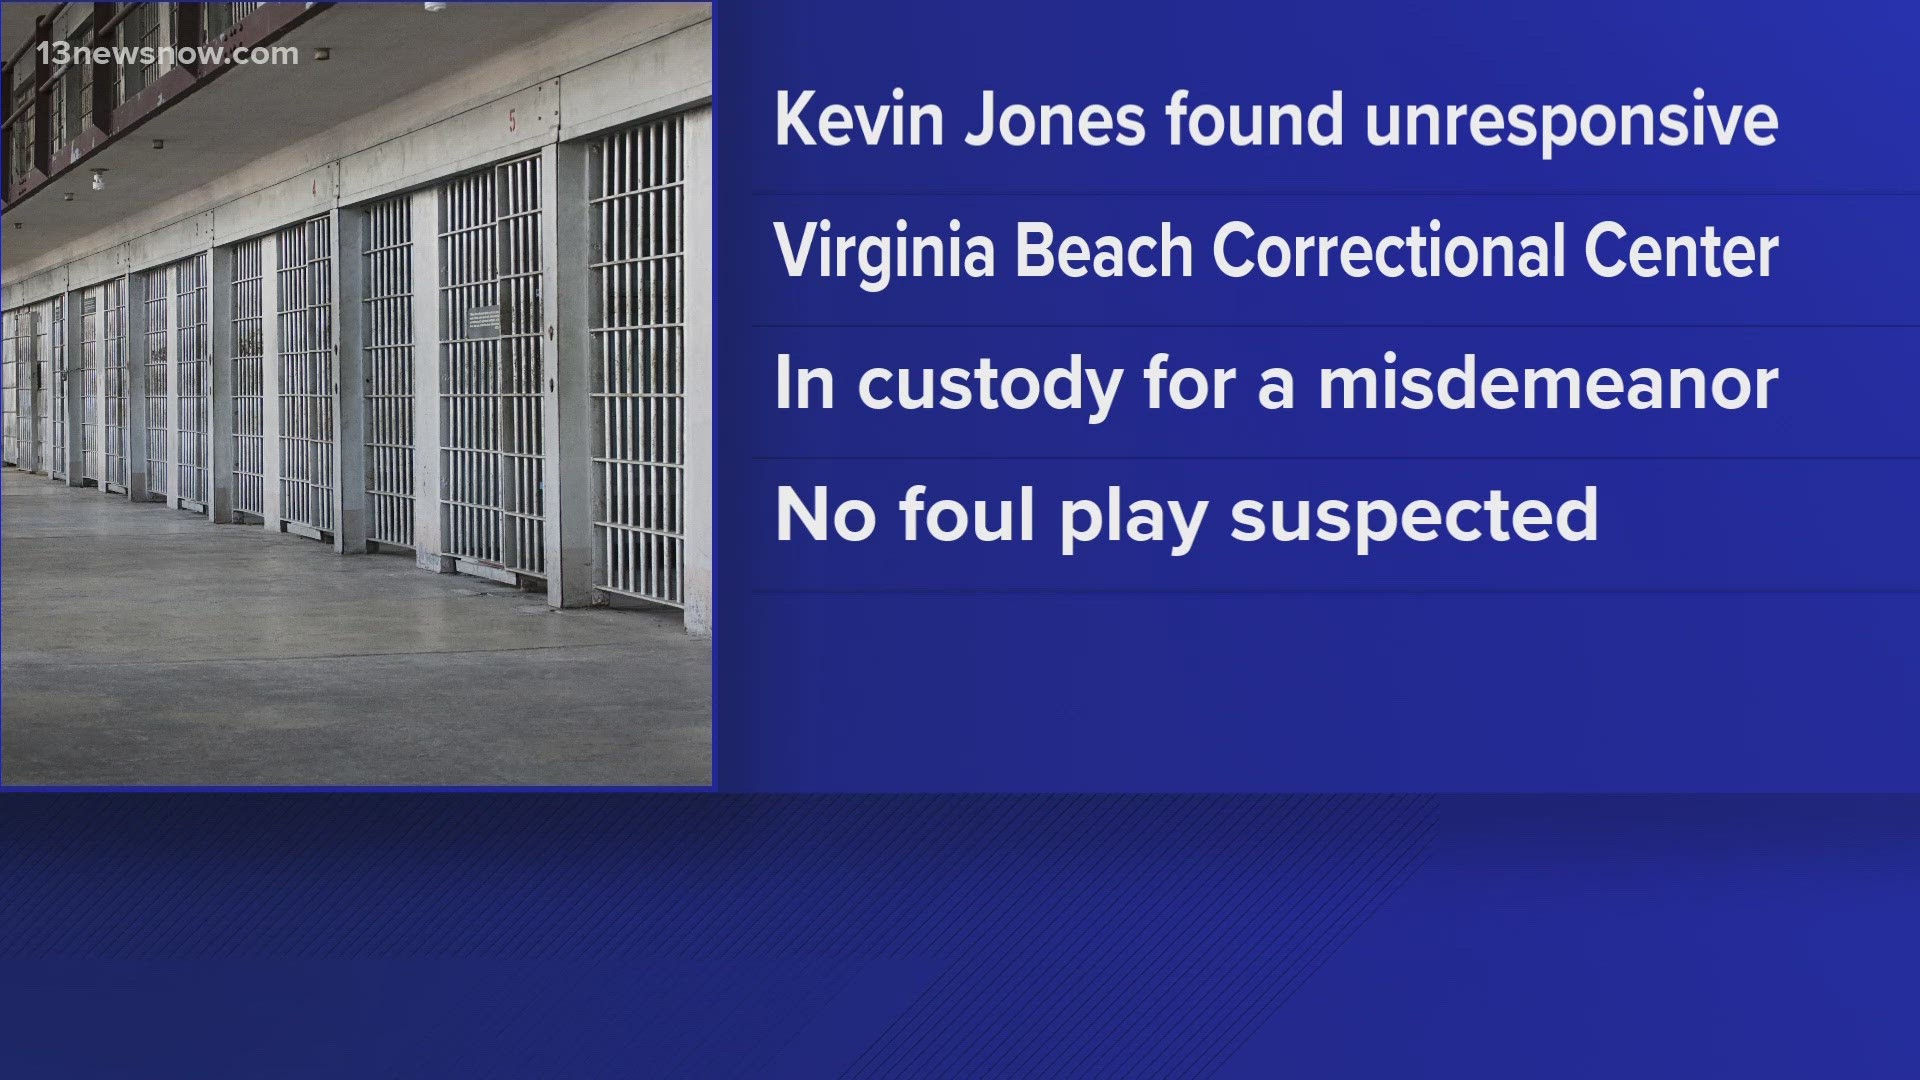 Around 4:20 a.m., inmates alerted staff that Kevin Jones, 36, wasn't moving. He died shortly after medical staff performed aid.